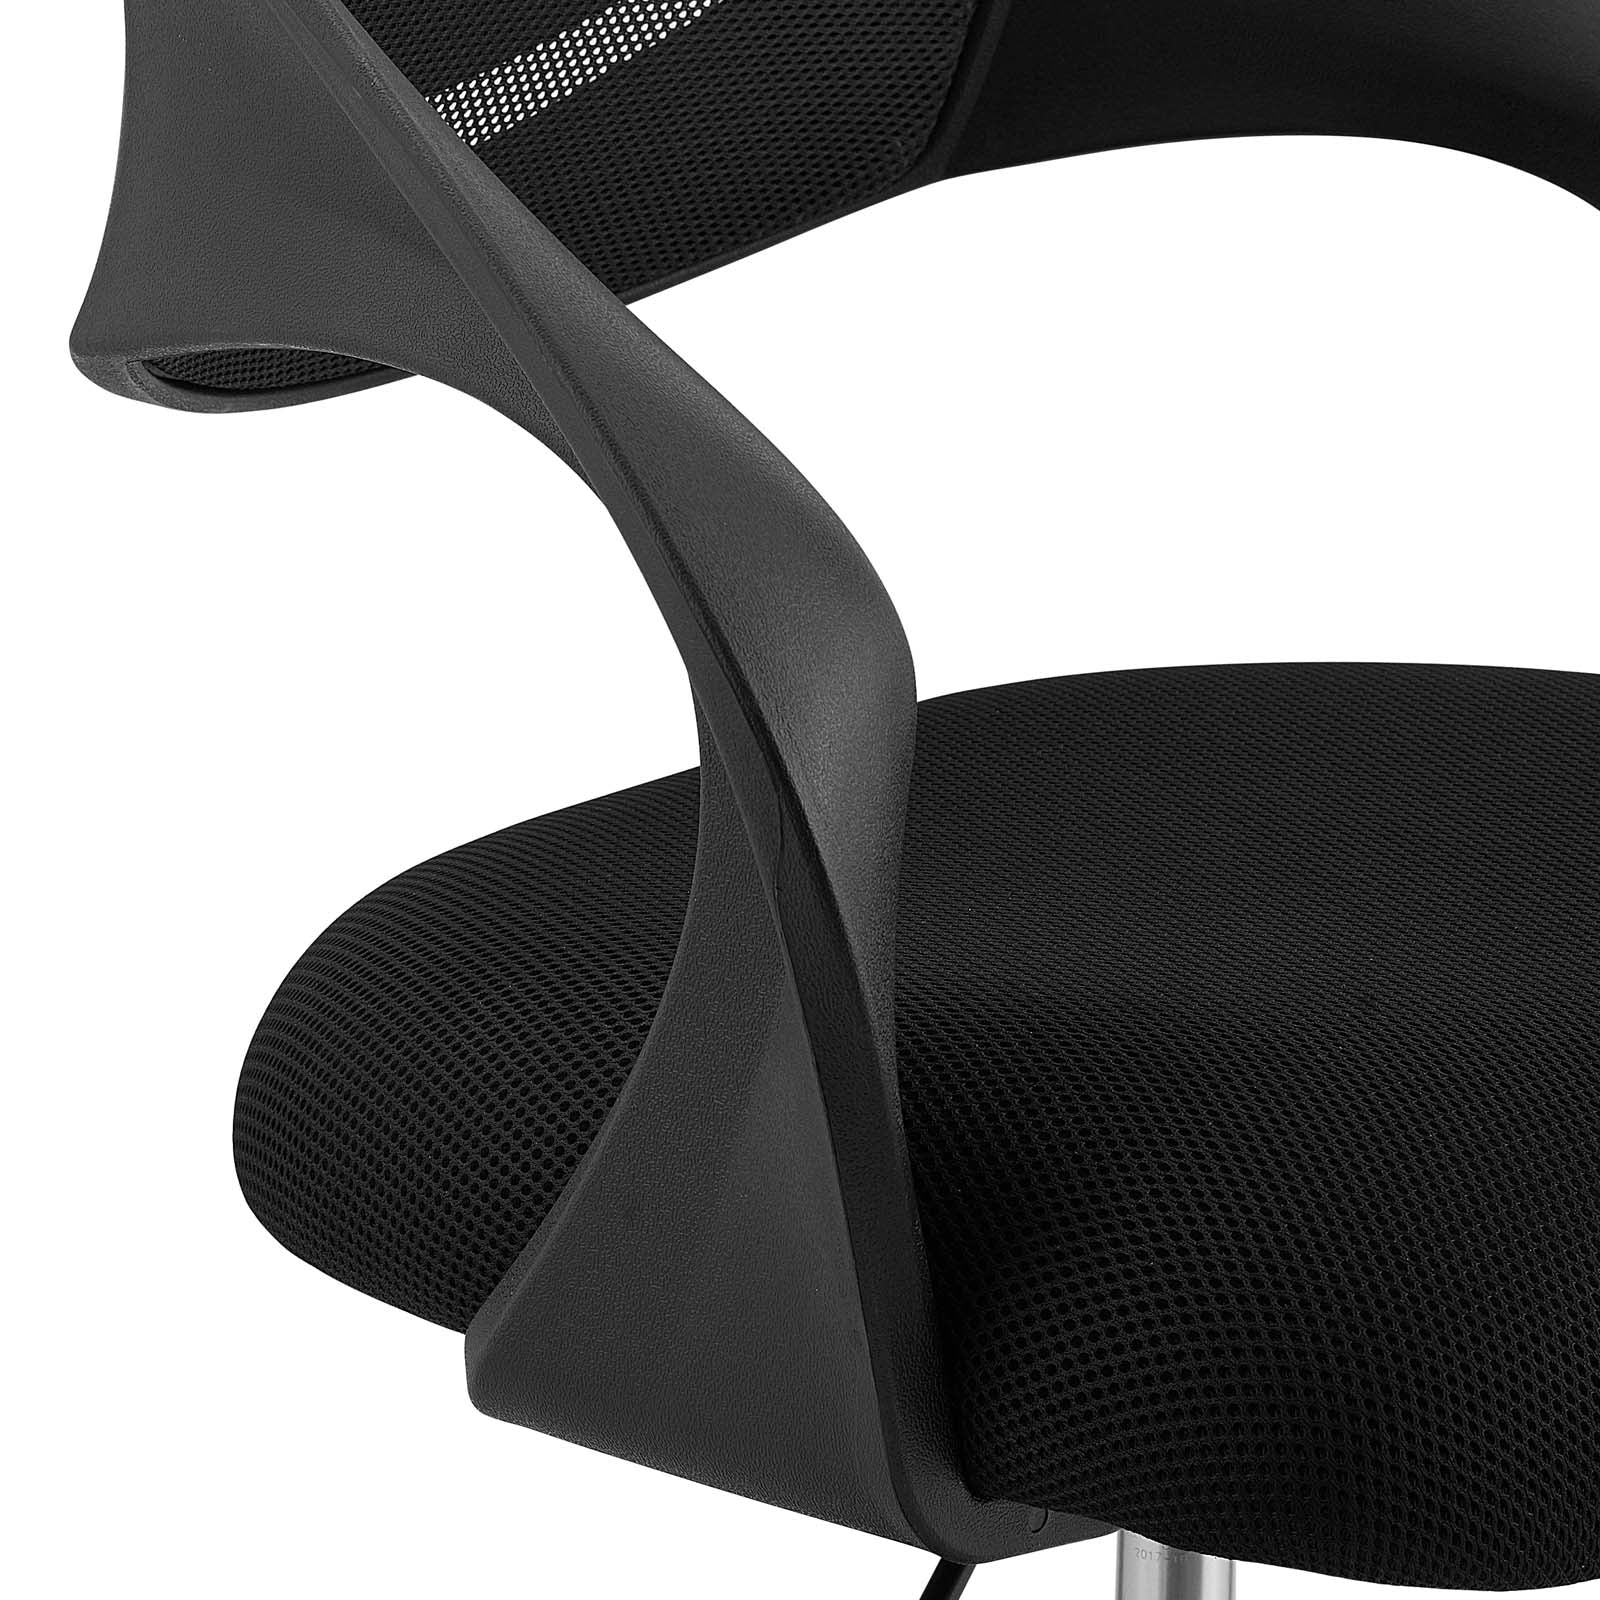 Shop Mesh Drafting Chair for Your Office | BUILDMyplace